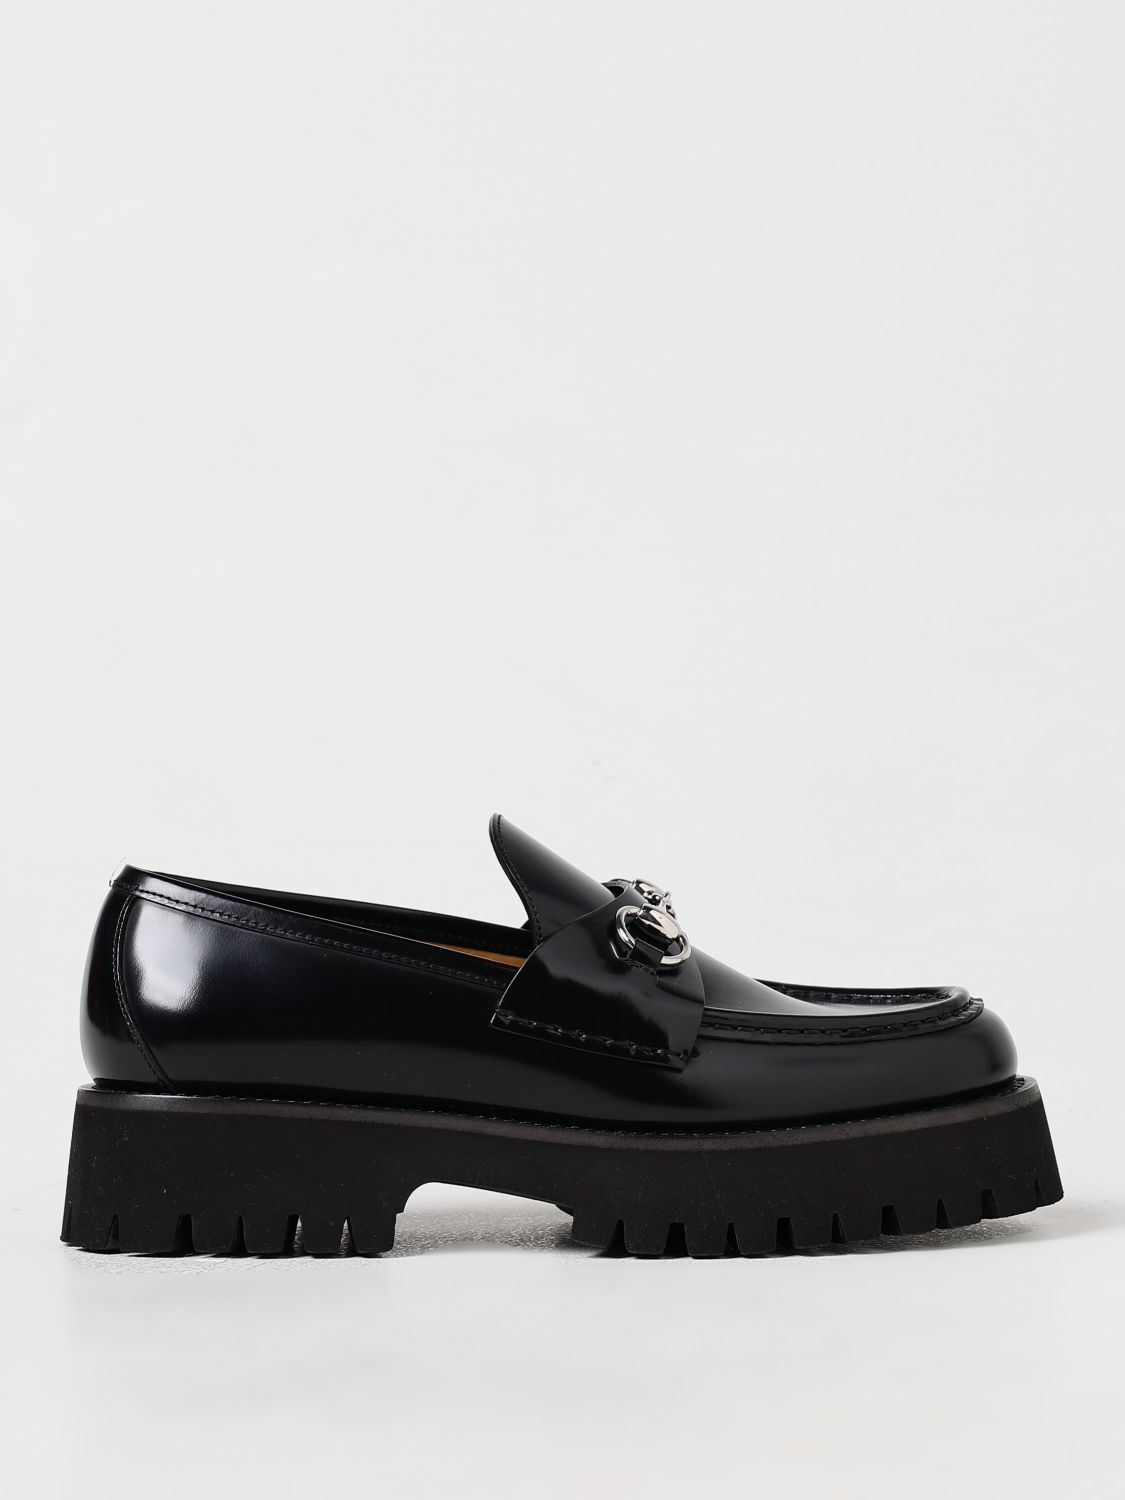 Gucci Loafers Woman Black Woman